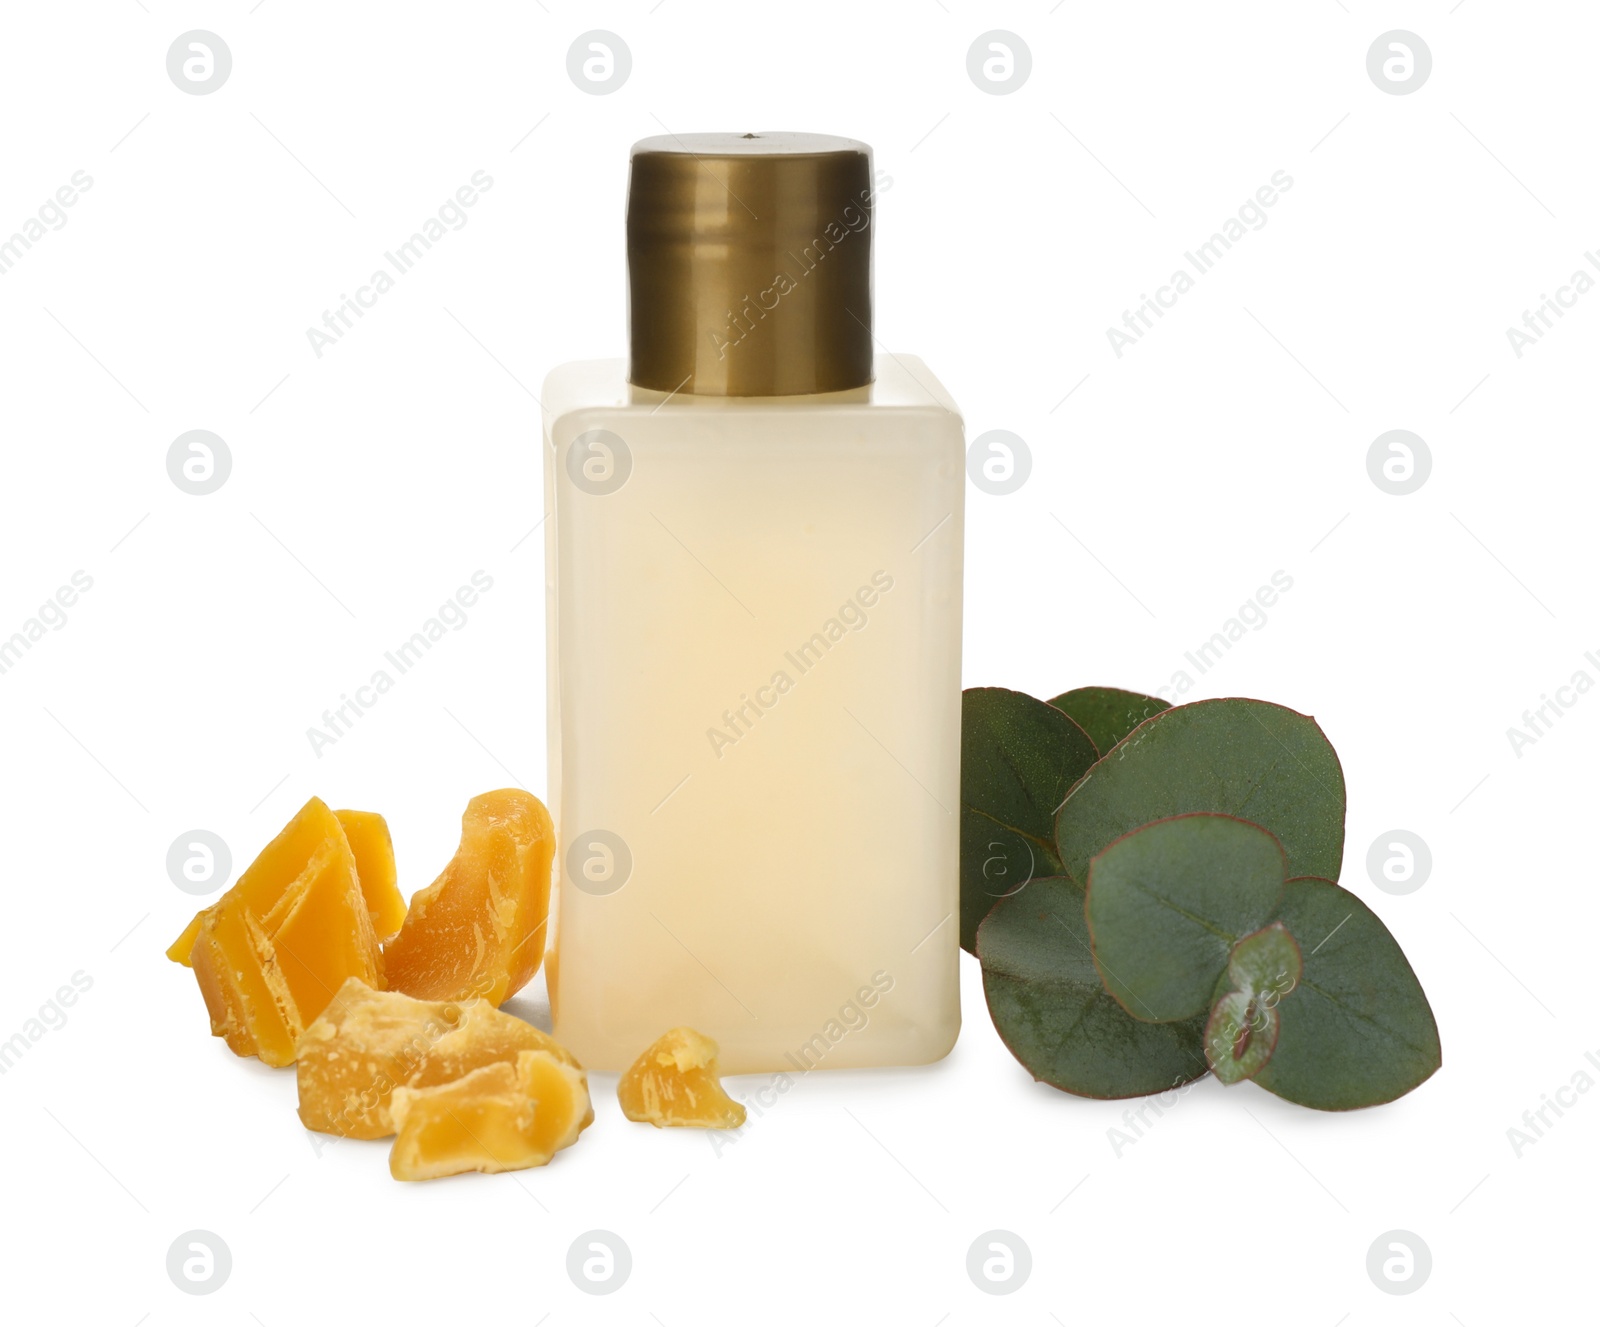 Photo of Bottle of cosmetic product, natural beeswax and eucalyptus on white background